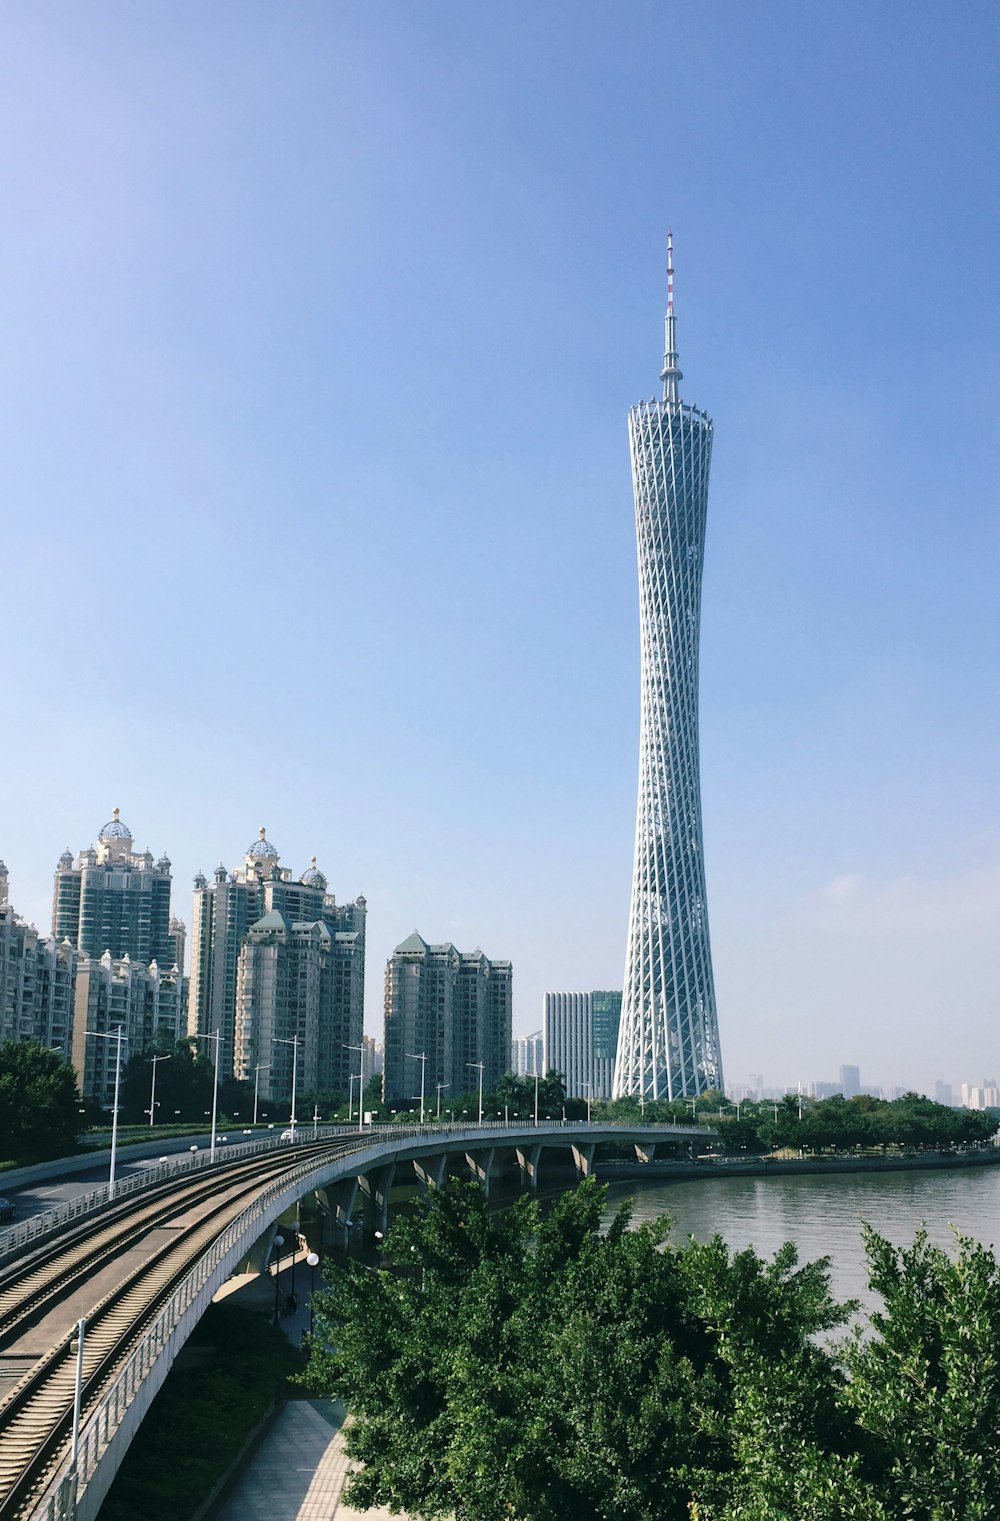 a very tall tower towering over a city next to a river